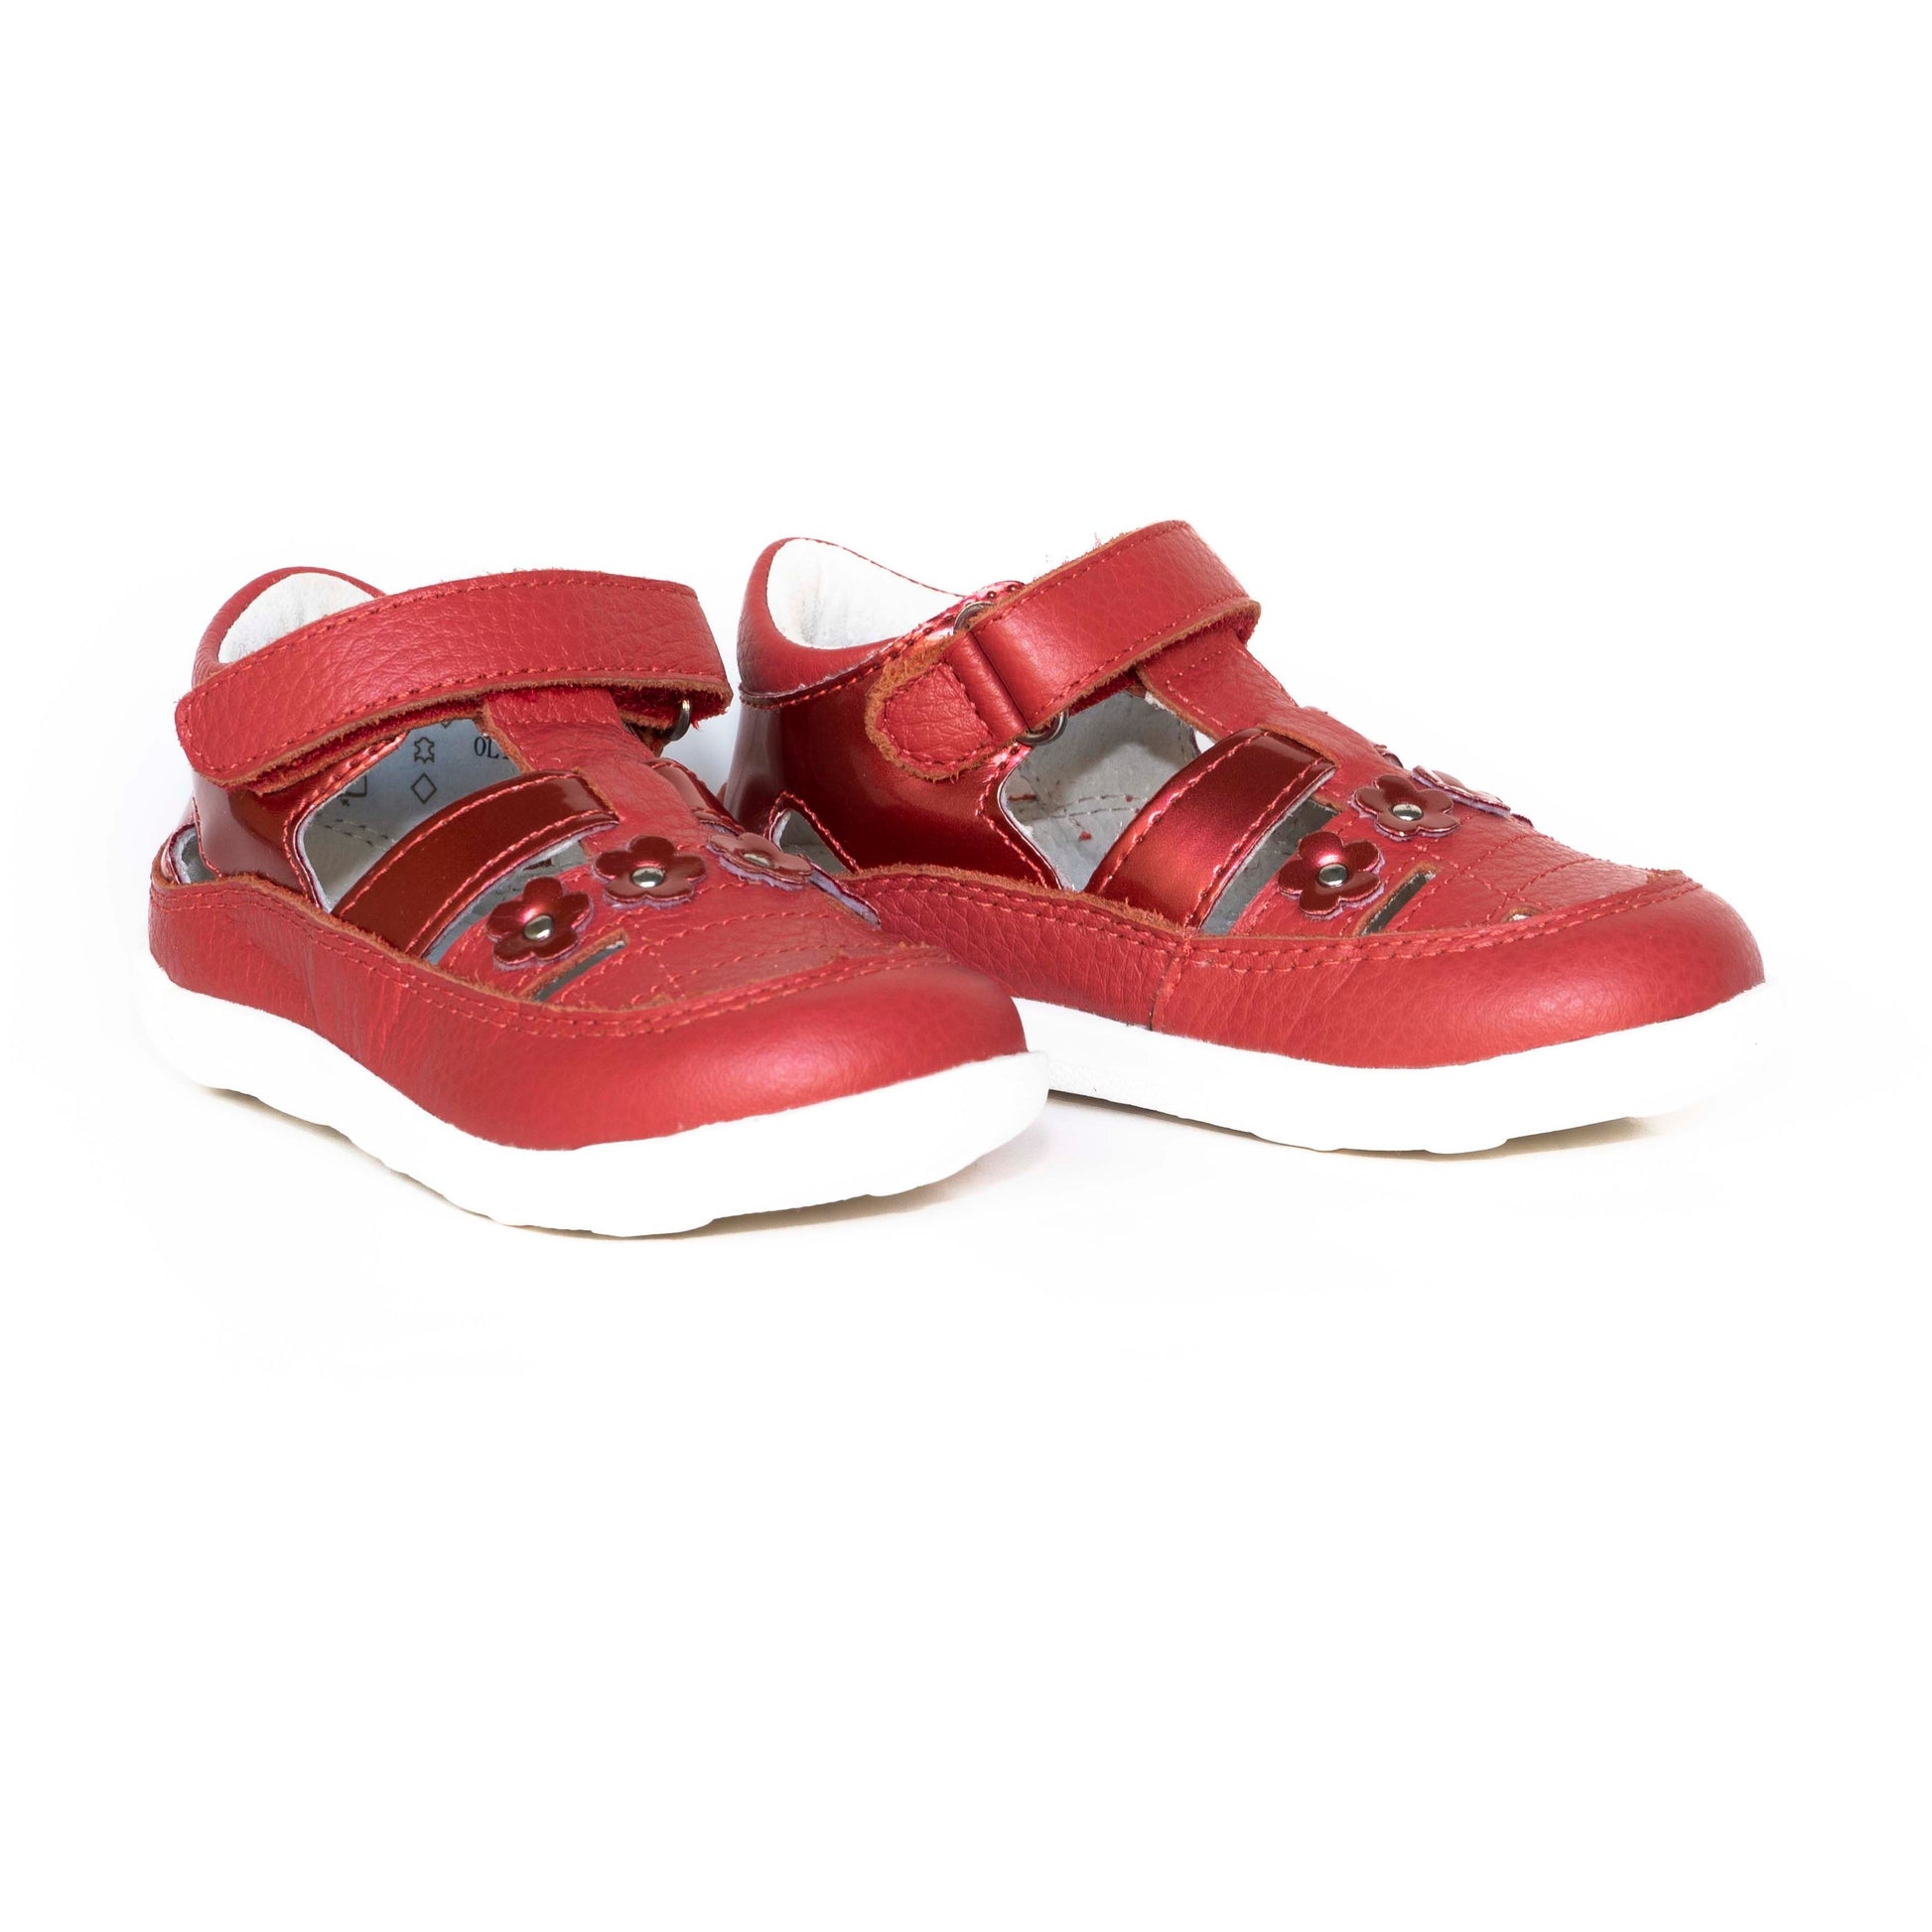 These red toddler girl shoes have a removable insole with a gentle arch support, which stimulates the foot to develop a healthy foot arch.